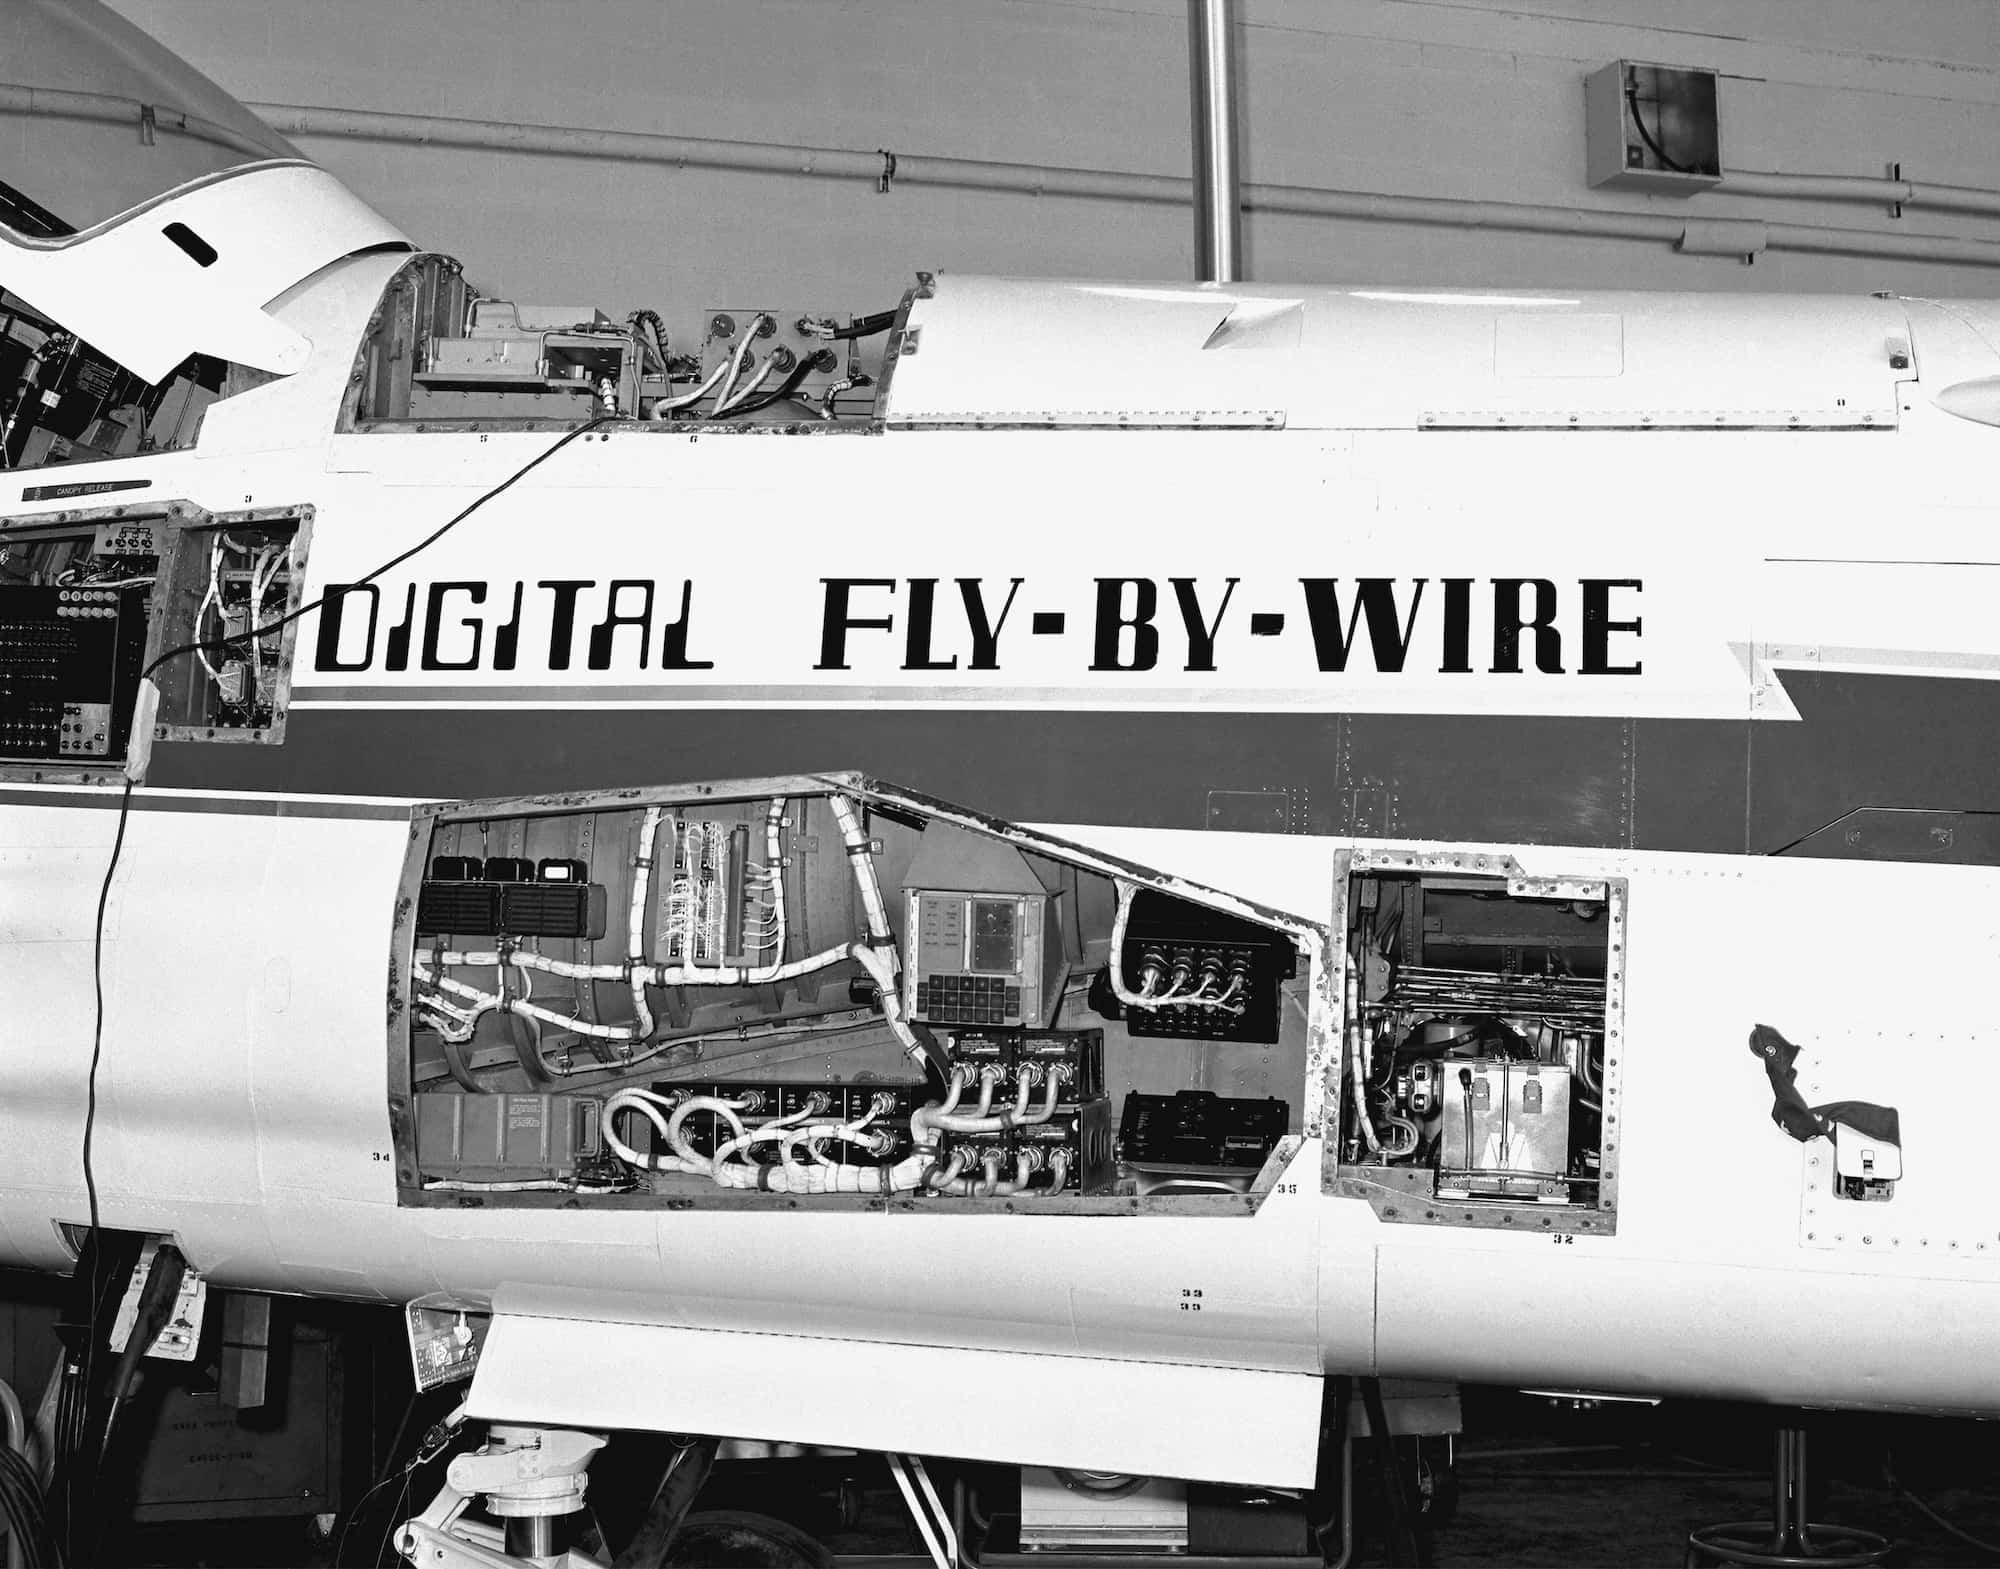 An experimental fly by wire system in the Vought F-8 Crusader using data-processing equipment adapted from the Apollo Guidance Computer